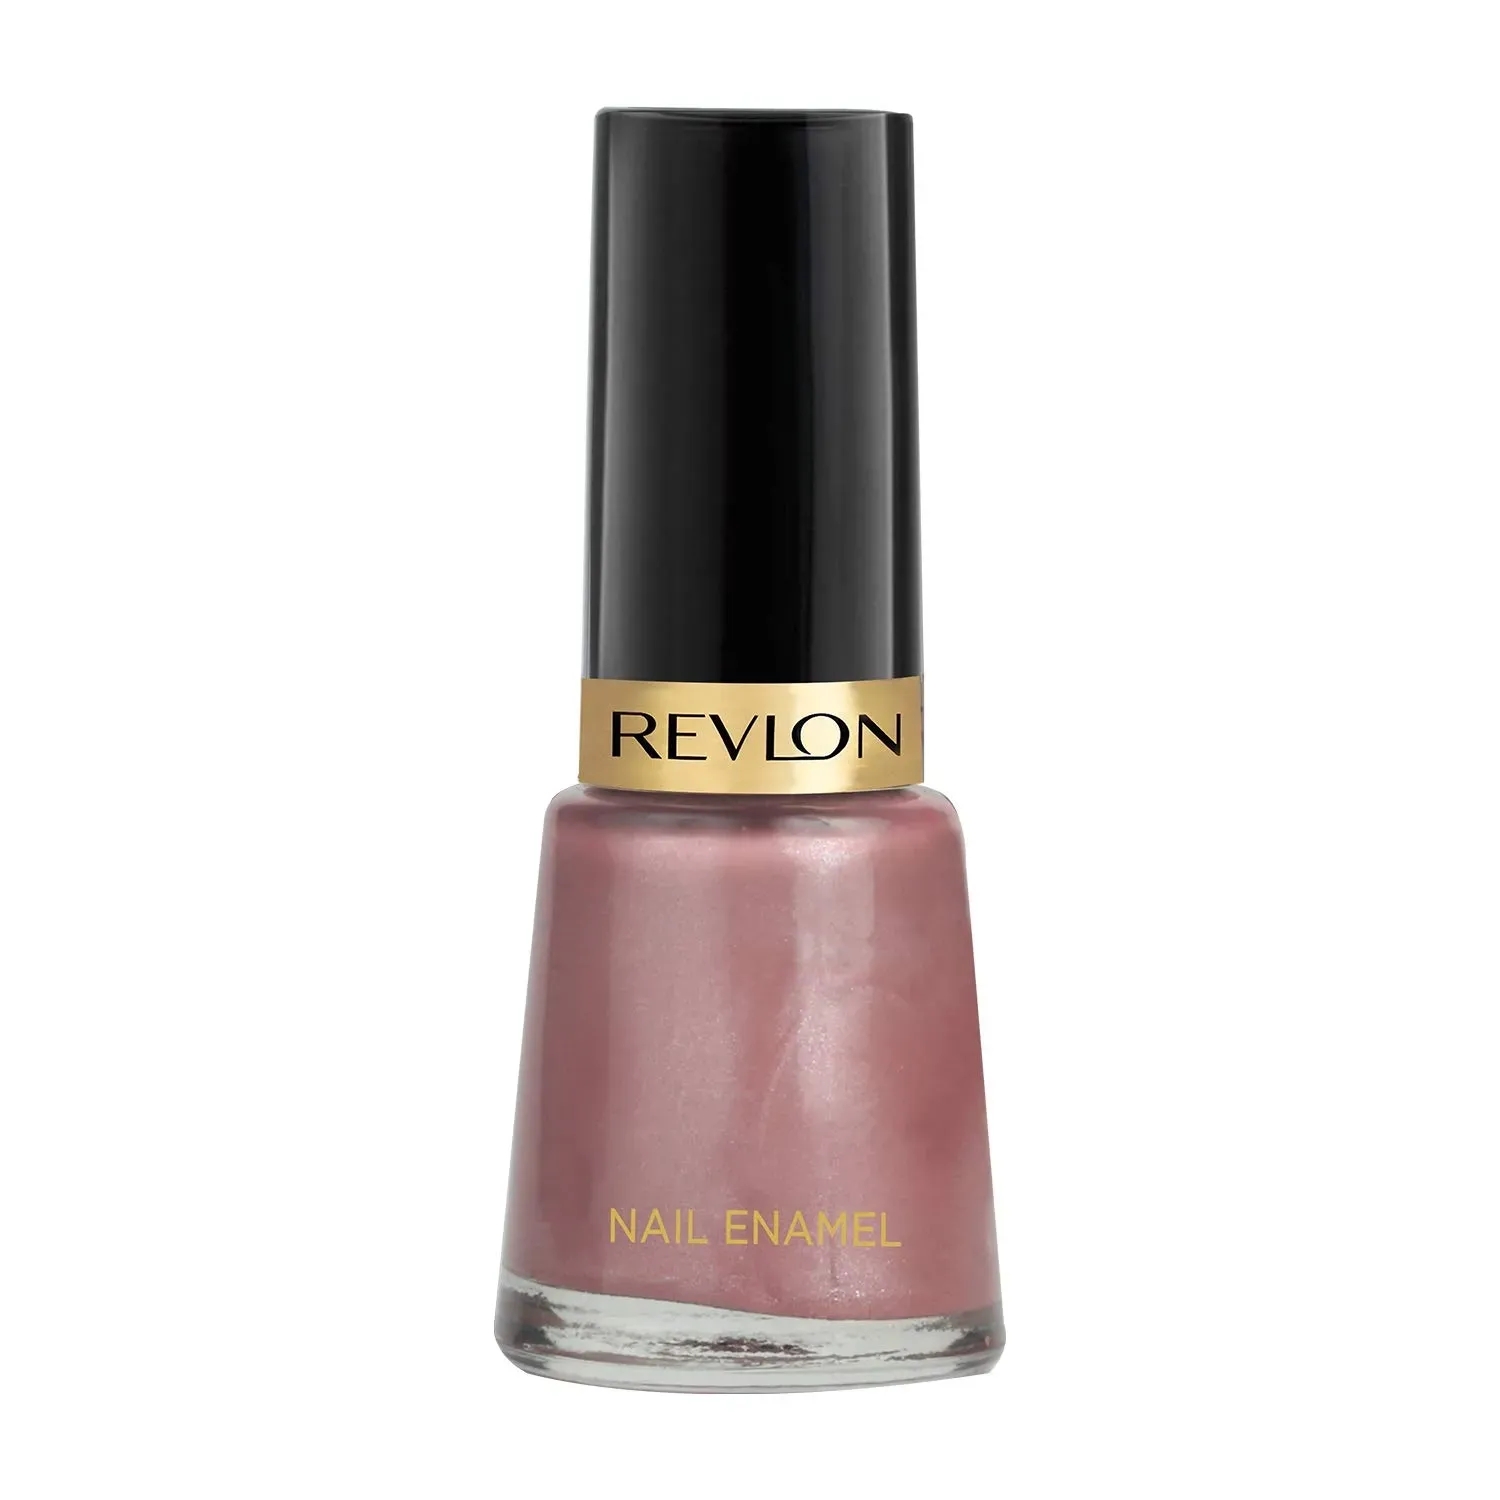 Buy Revlon Nail Enamel, Chip Resistant Nail Polish, Glossy Shine Finish, in  Pink, 145 Coy, 0.5 oz Online at Low Prices in India - Amazon.in